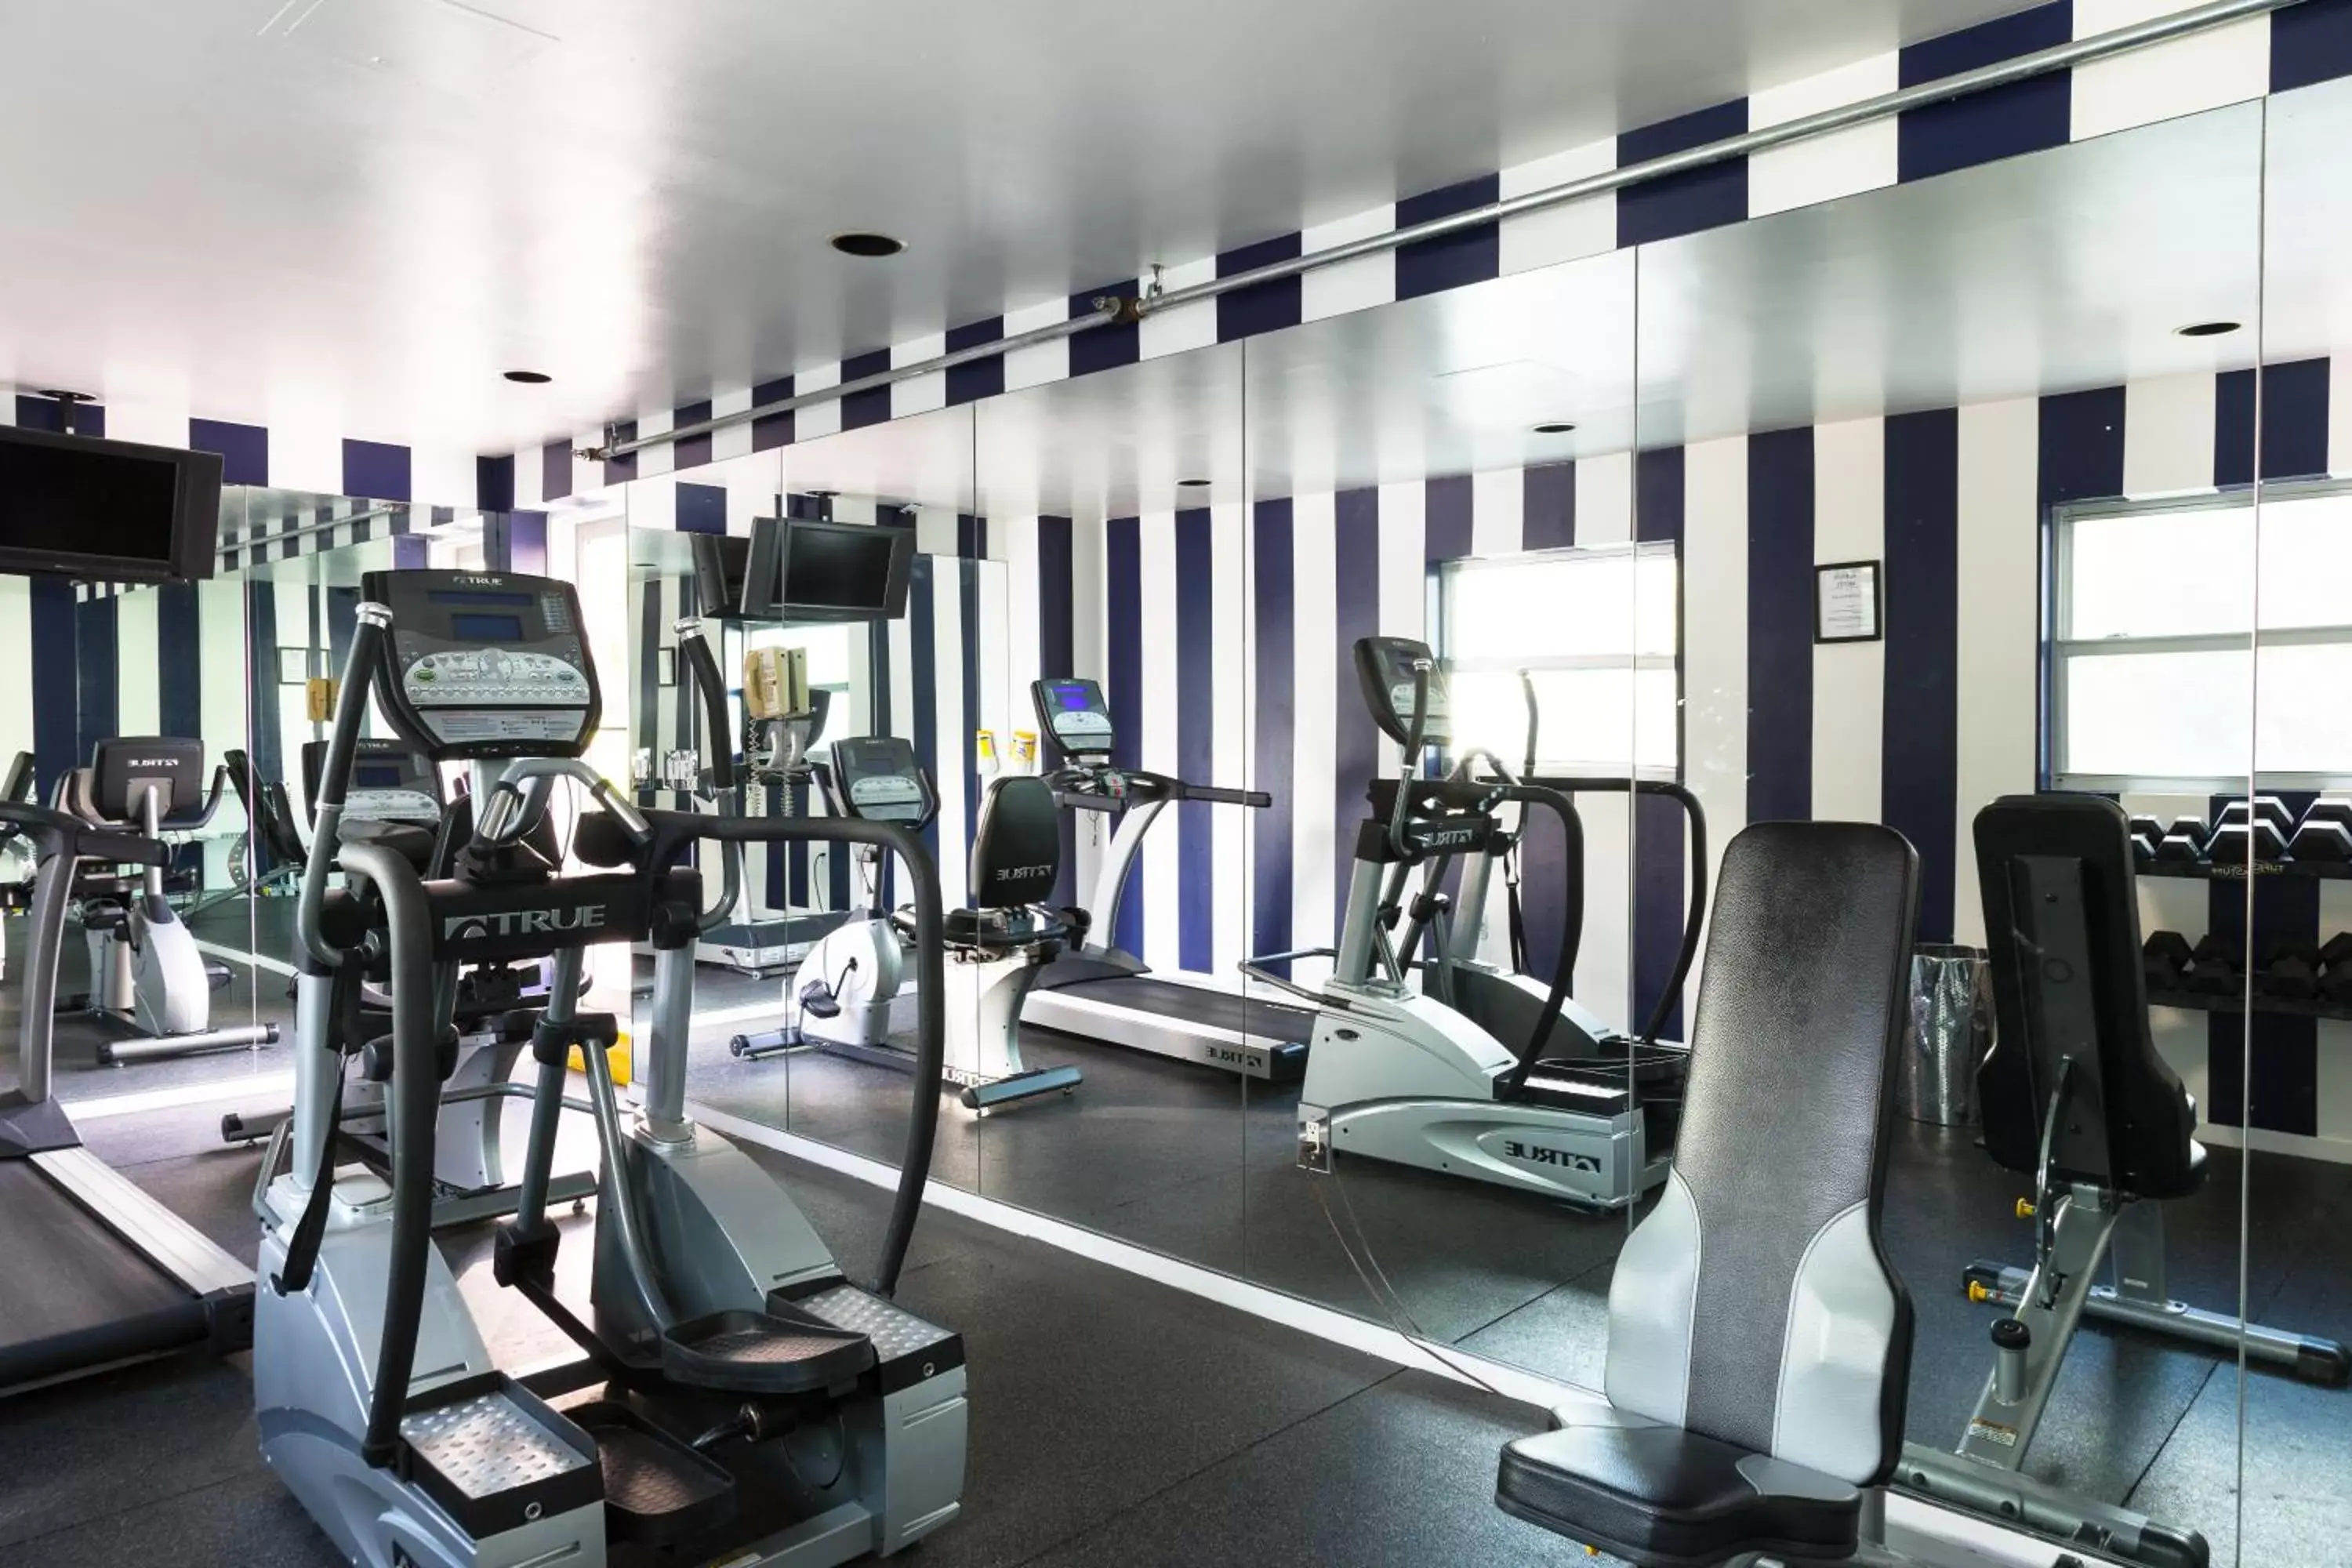 Fitness centre/facilities, Fitness Center/Facilities in Albion Hotel